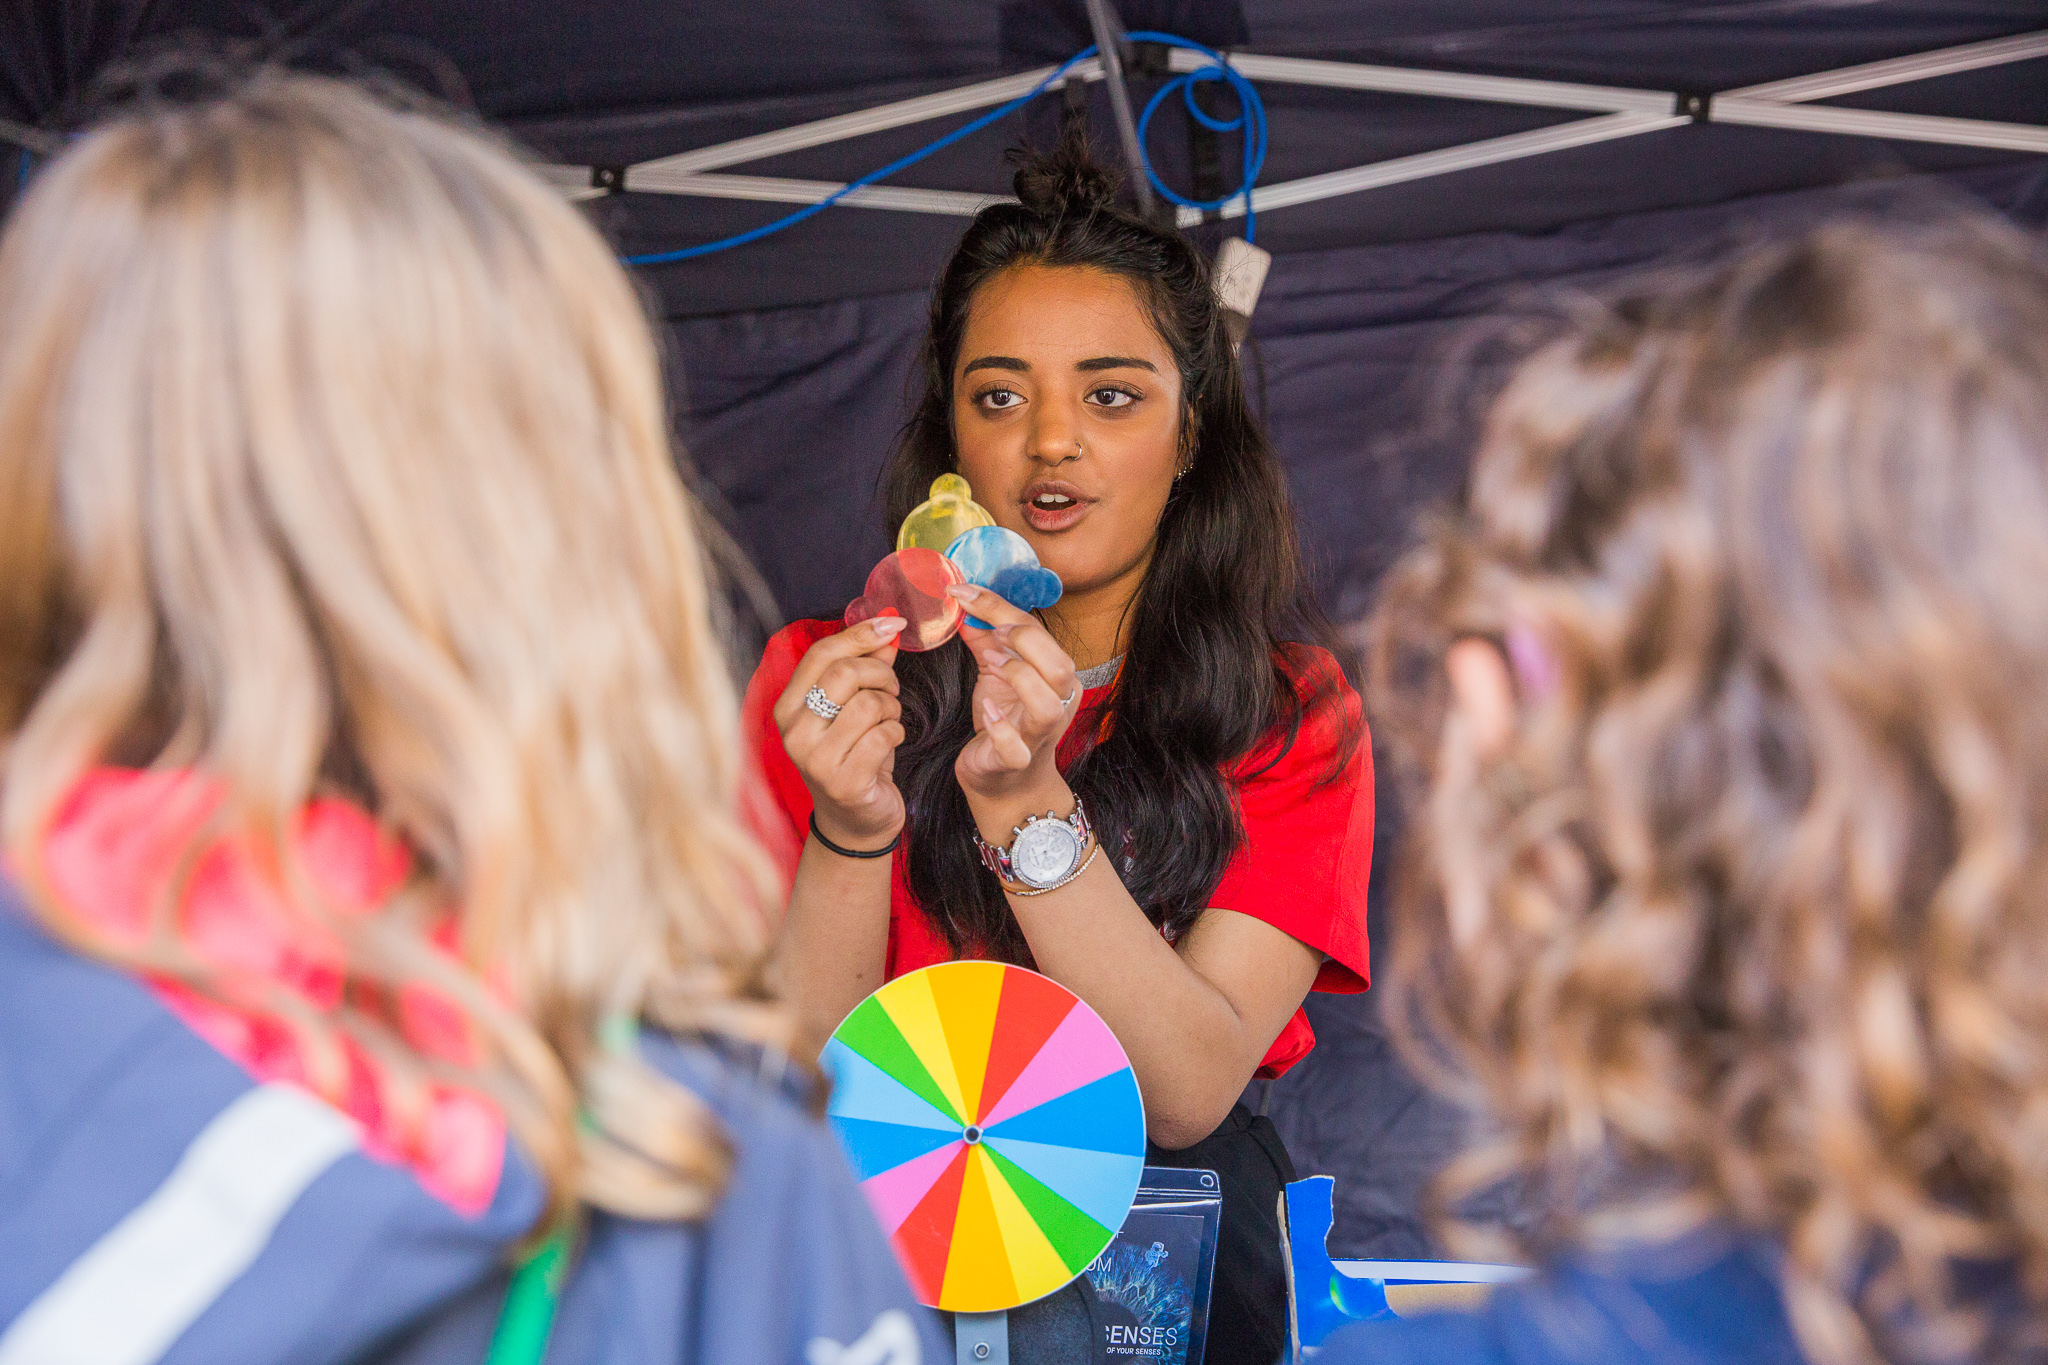 A woman demonstrating colour wheels to children at Bradford Science Festival